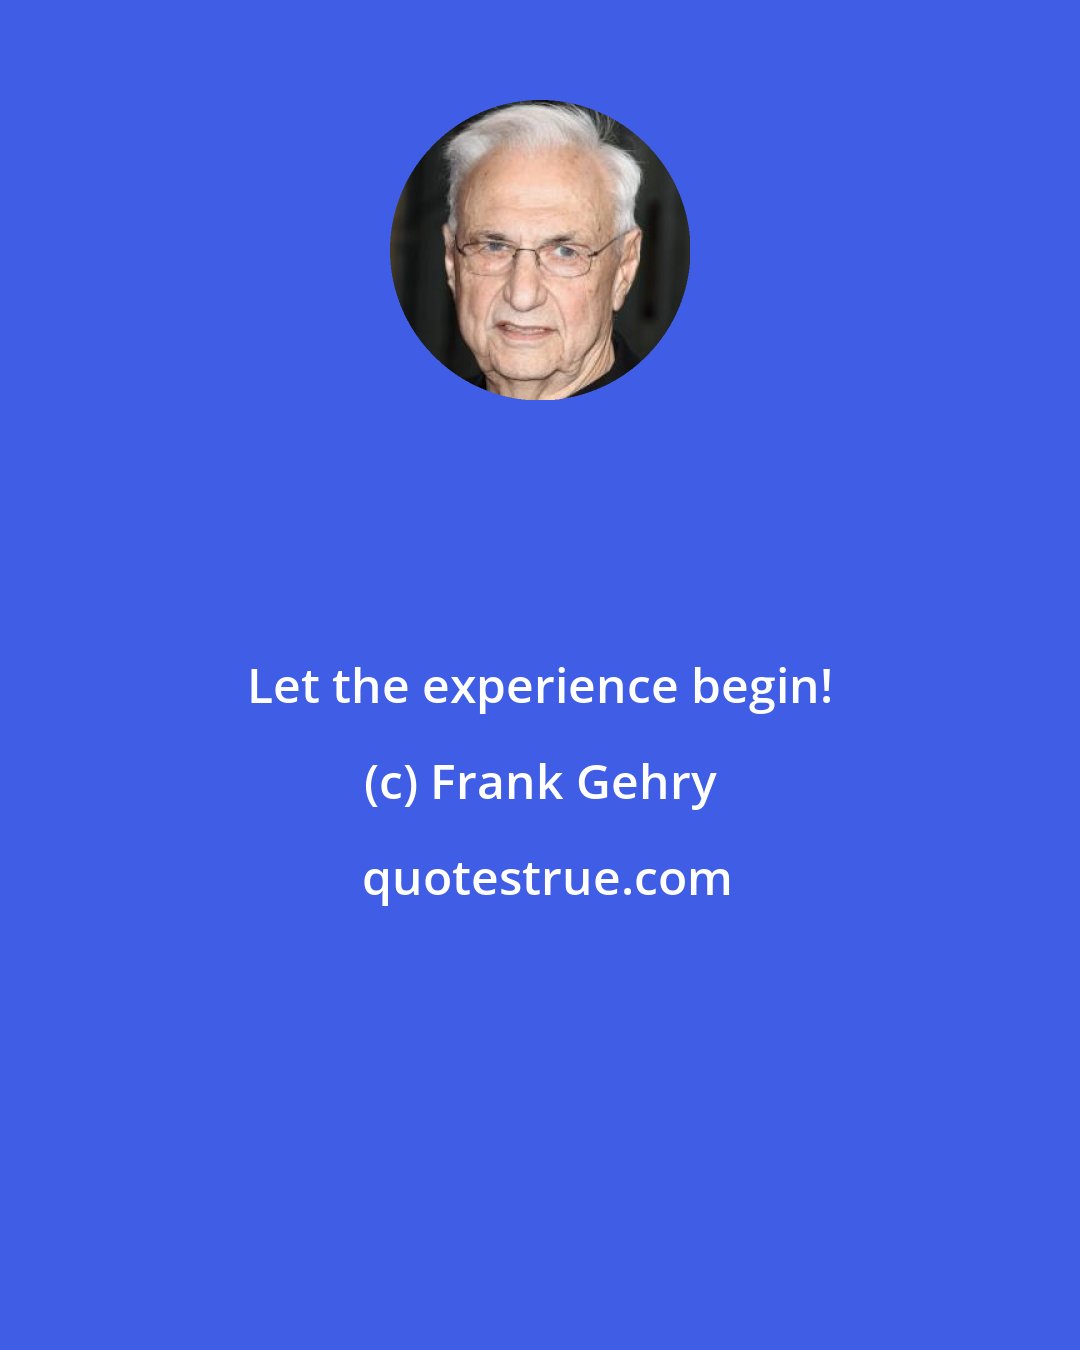 Frank Gehry: Let the experience begin!